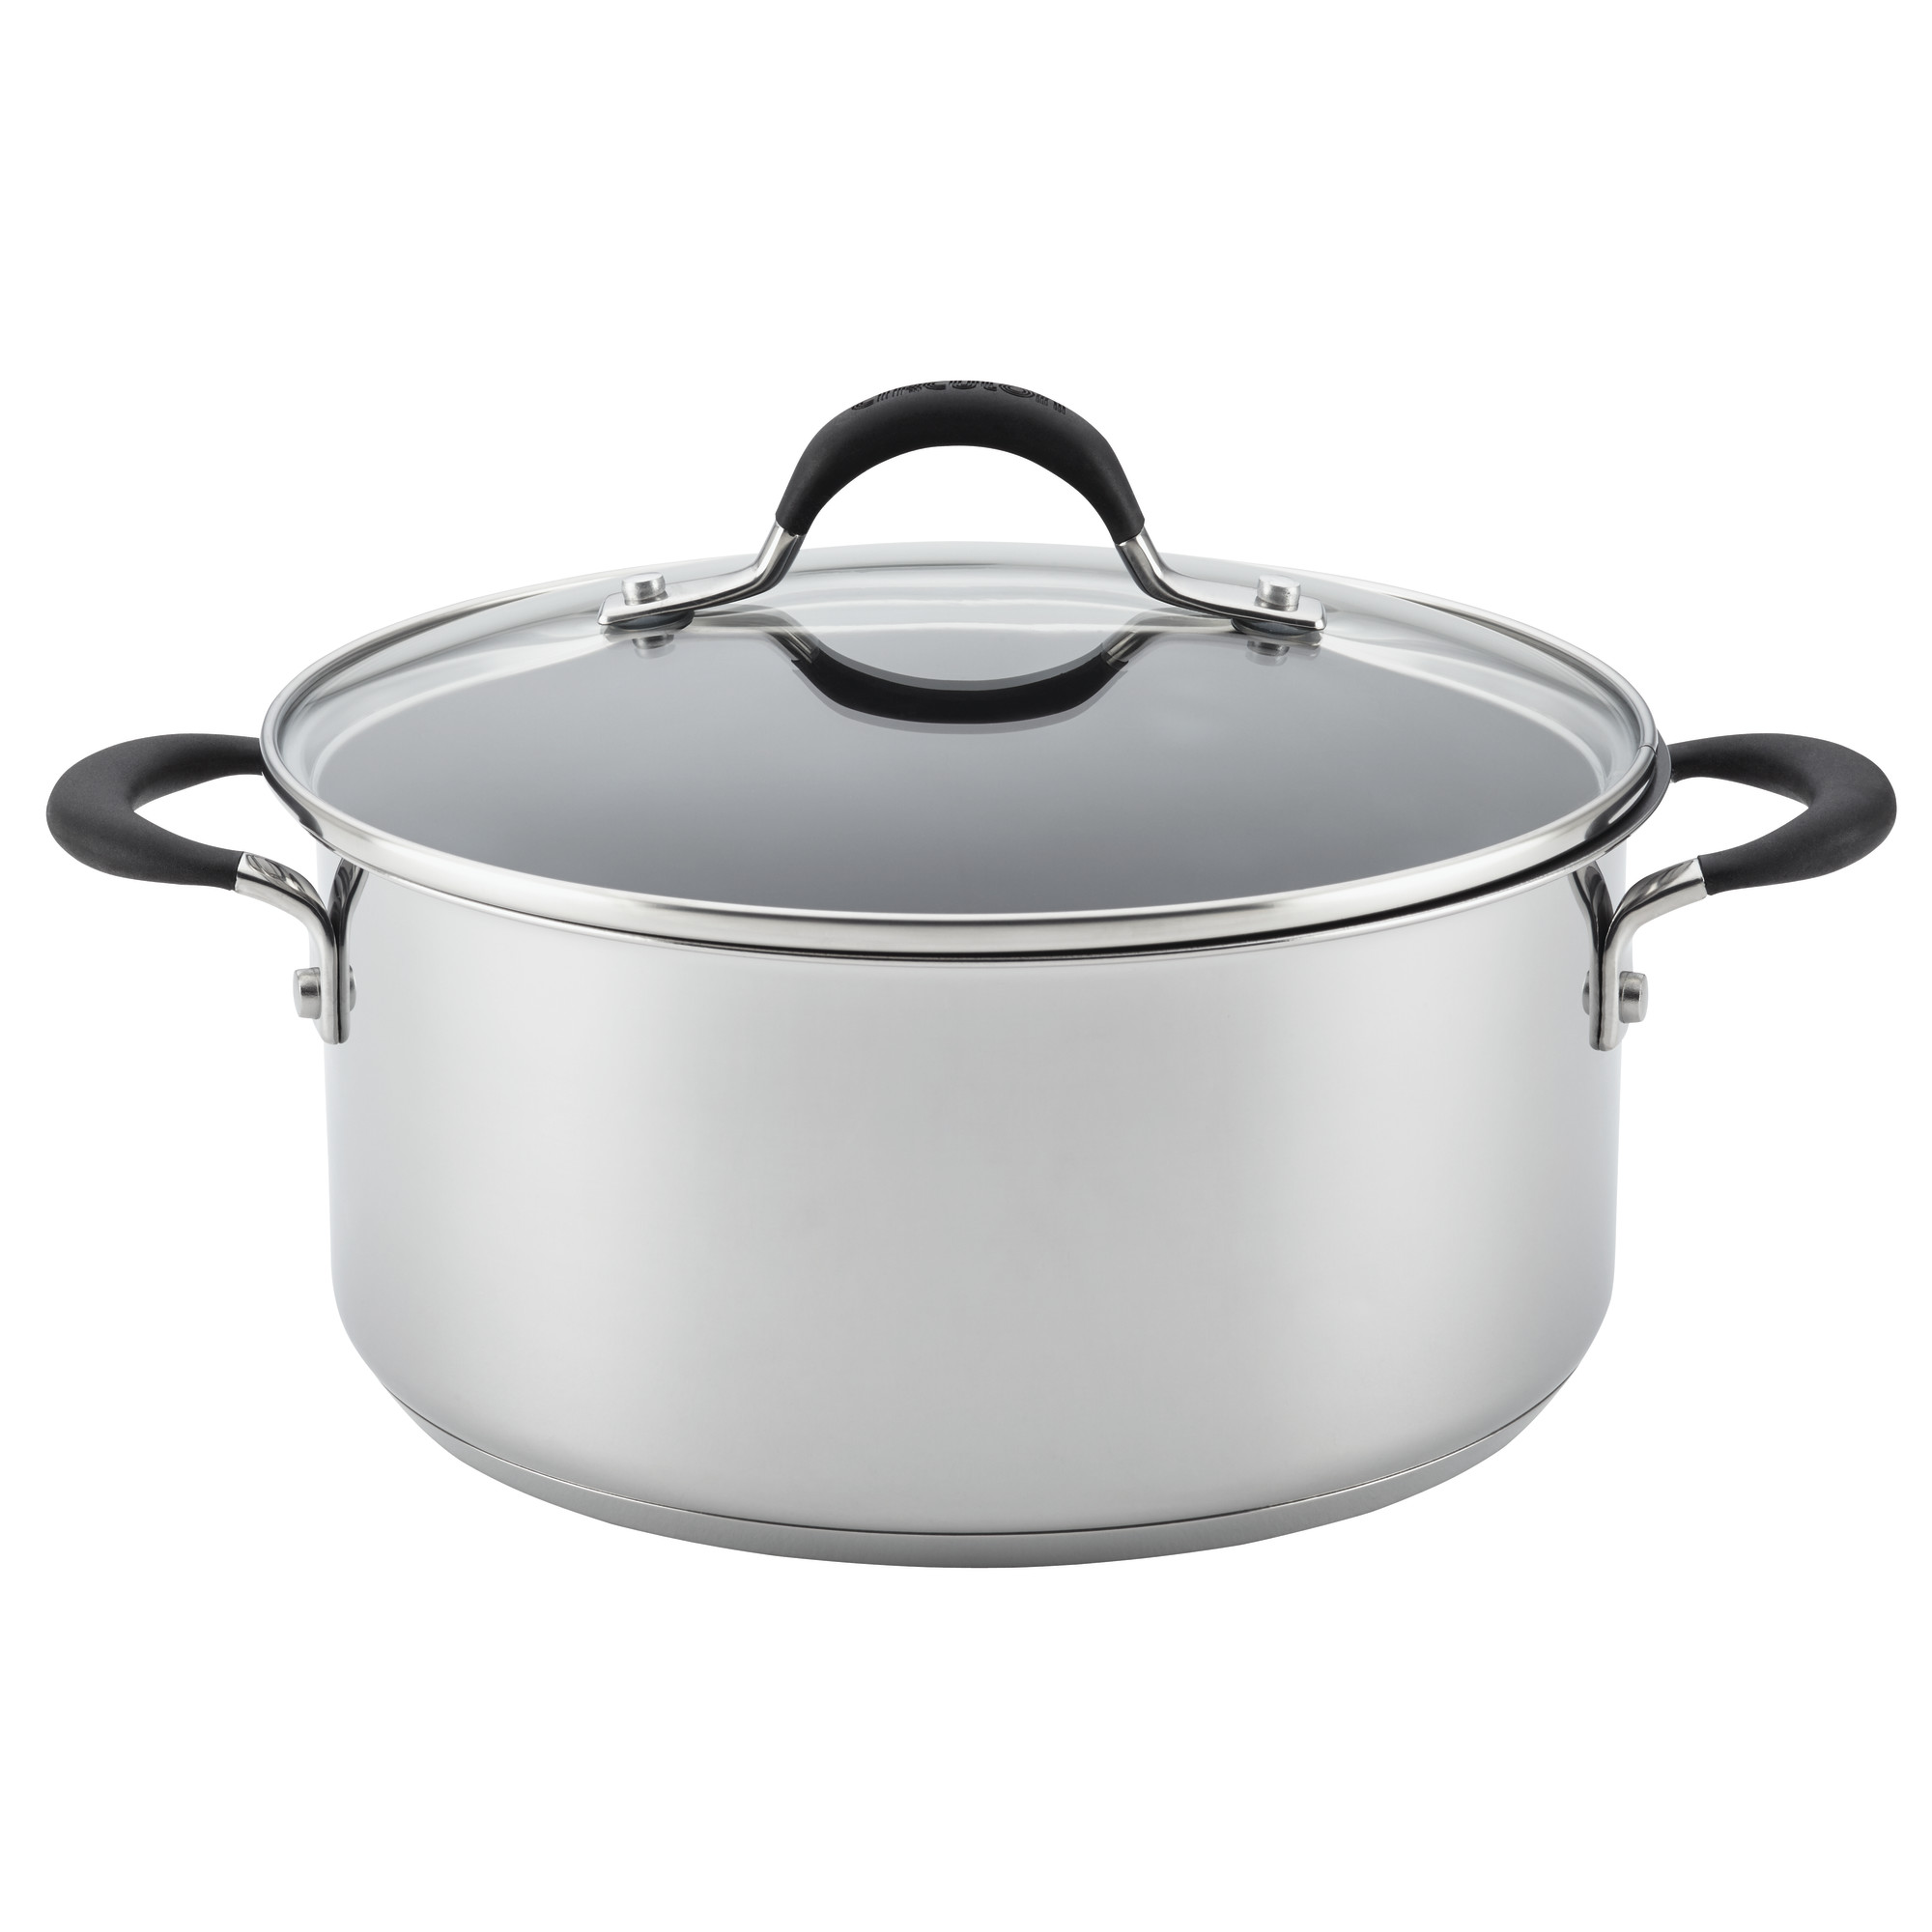 Circulon 11 Piece Momentum Stainless Steel Nonstick Pots and Pans - image 5 of 7